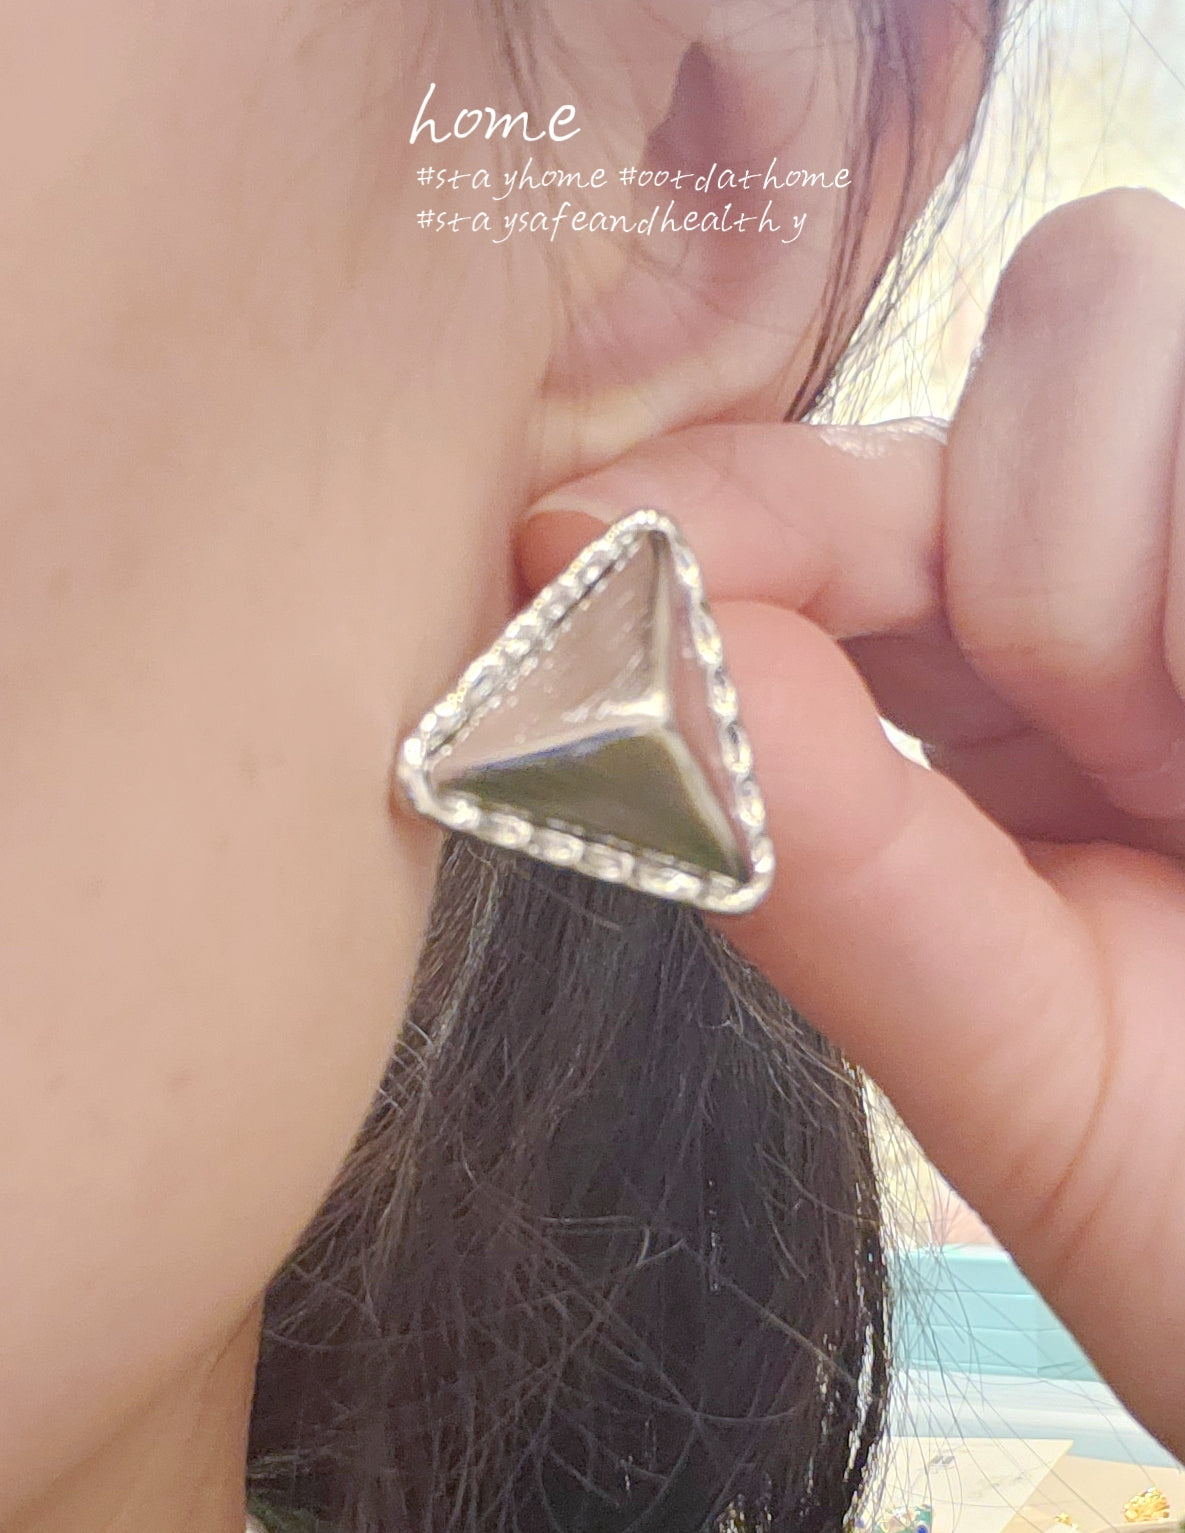 925 Sterling Silver Triangle Earring